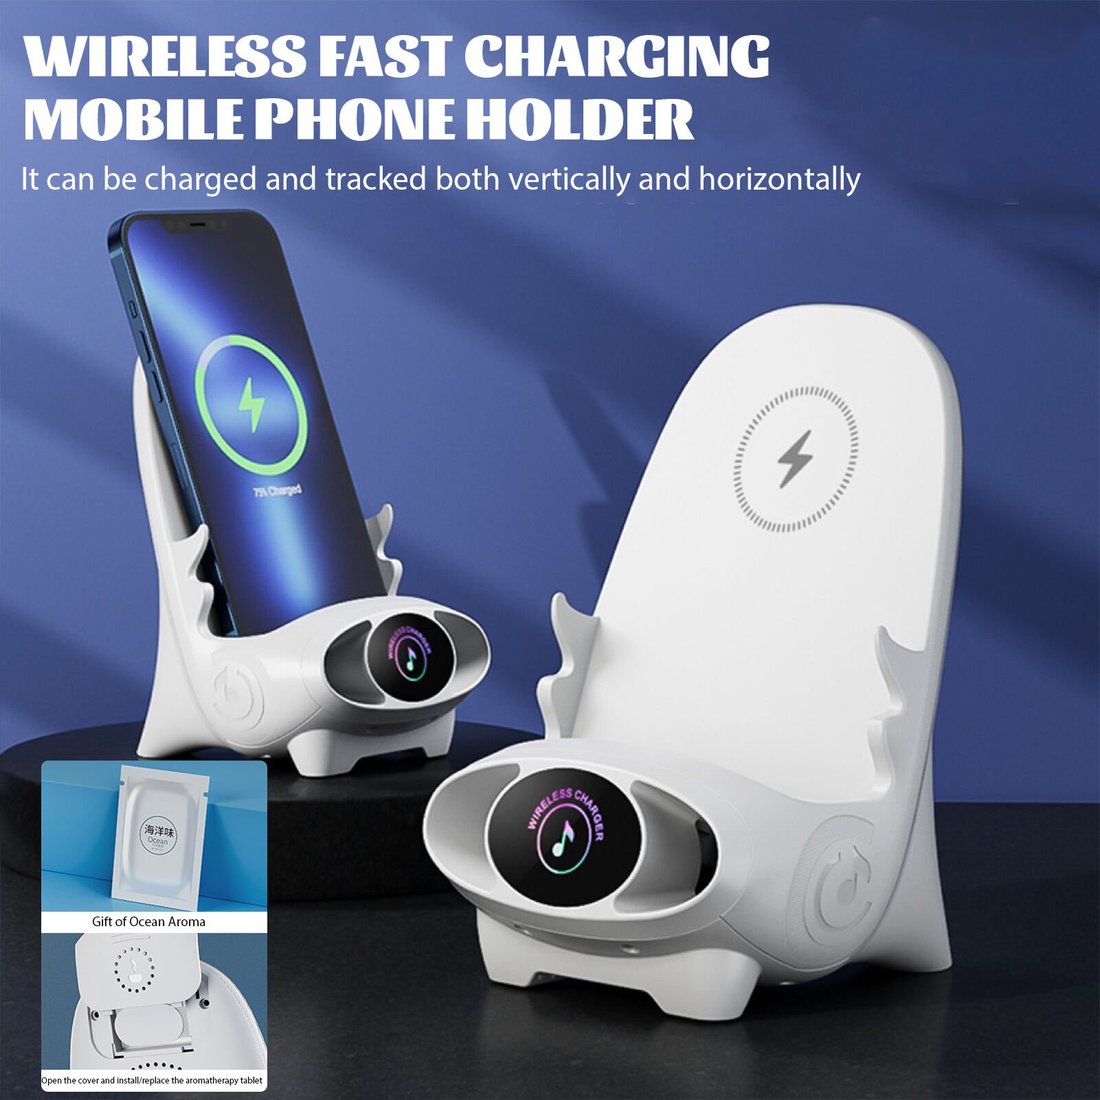 BIG SALE - 49% OFF - Upgraded Magnetic Wireless Fast Charging Multifunctional Mobile Phone Holder